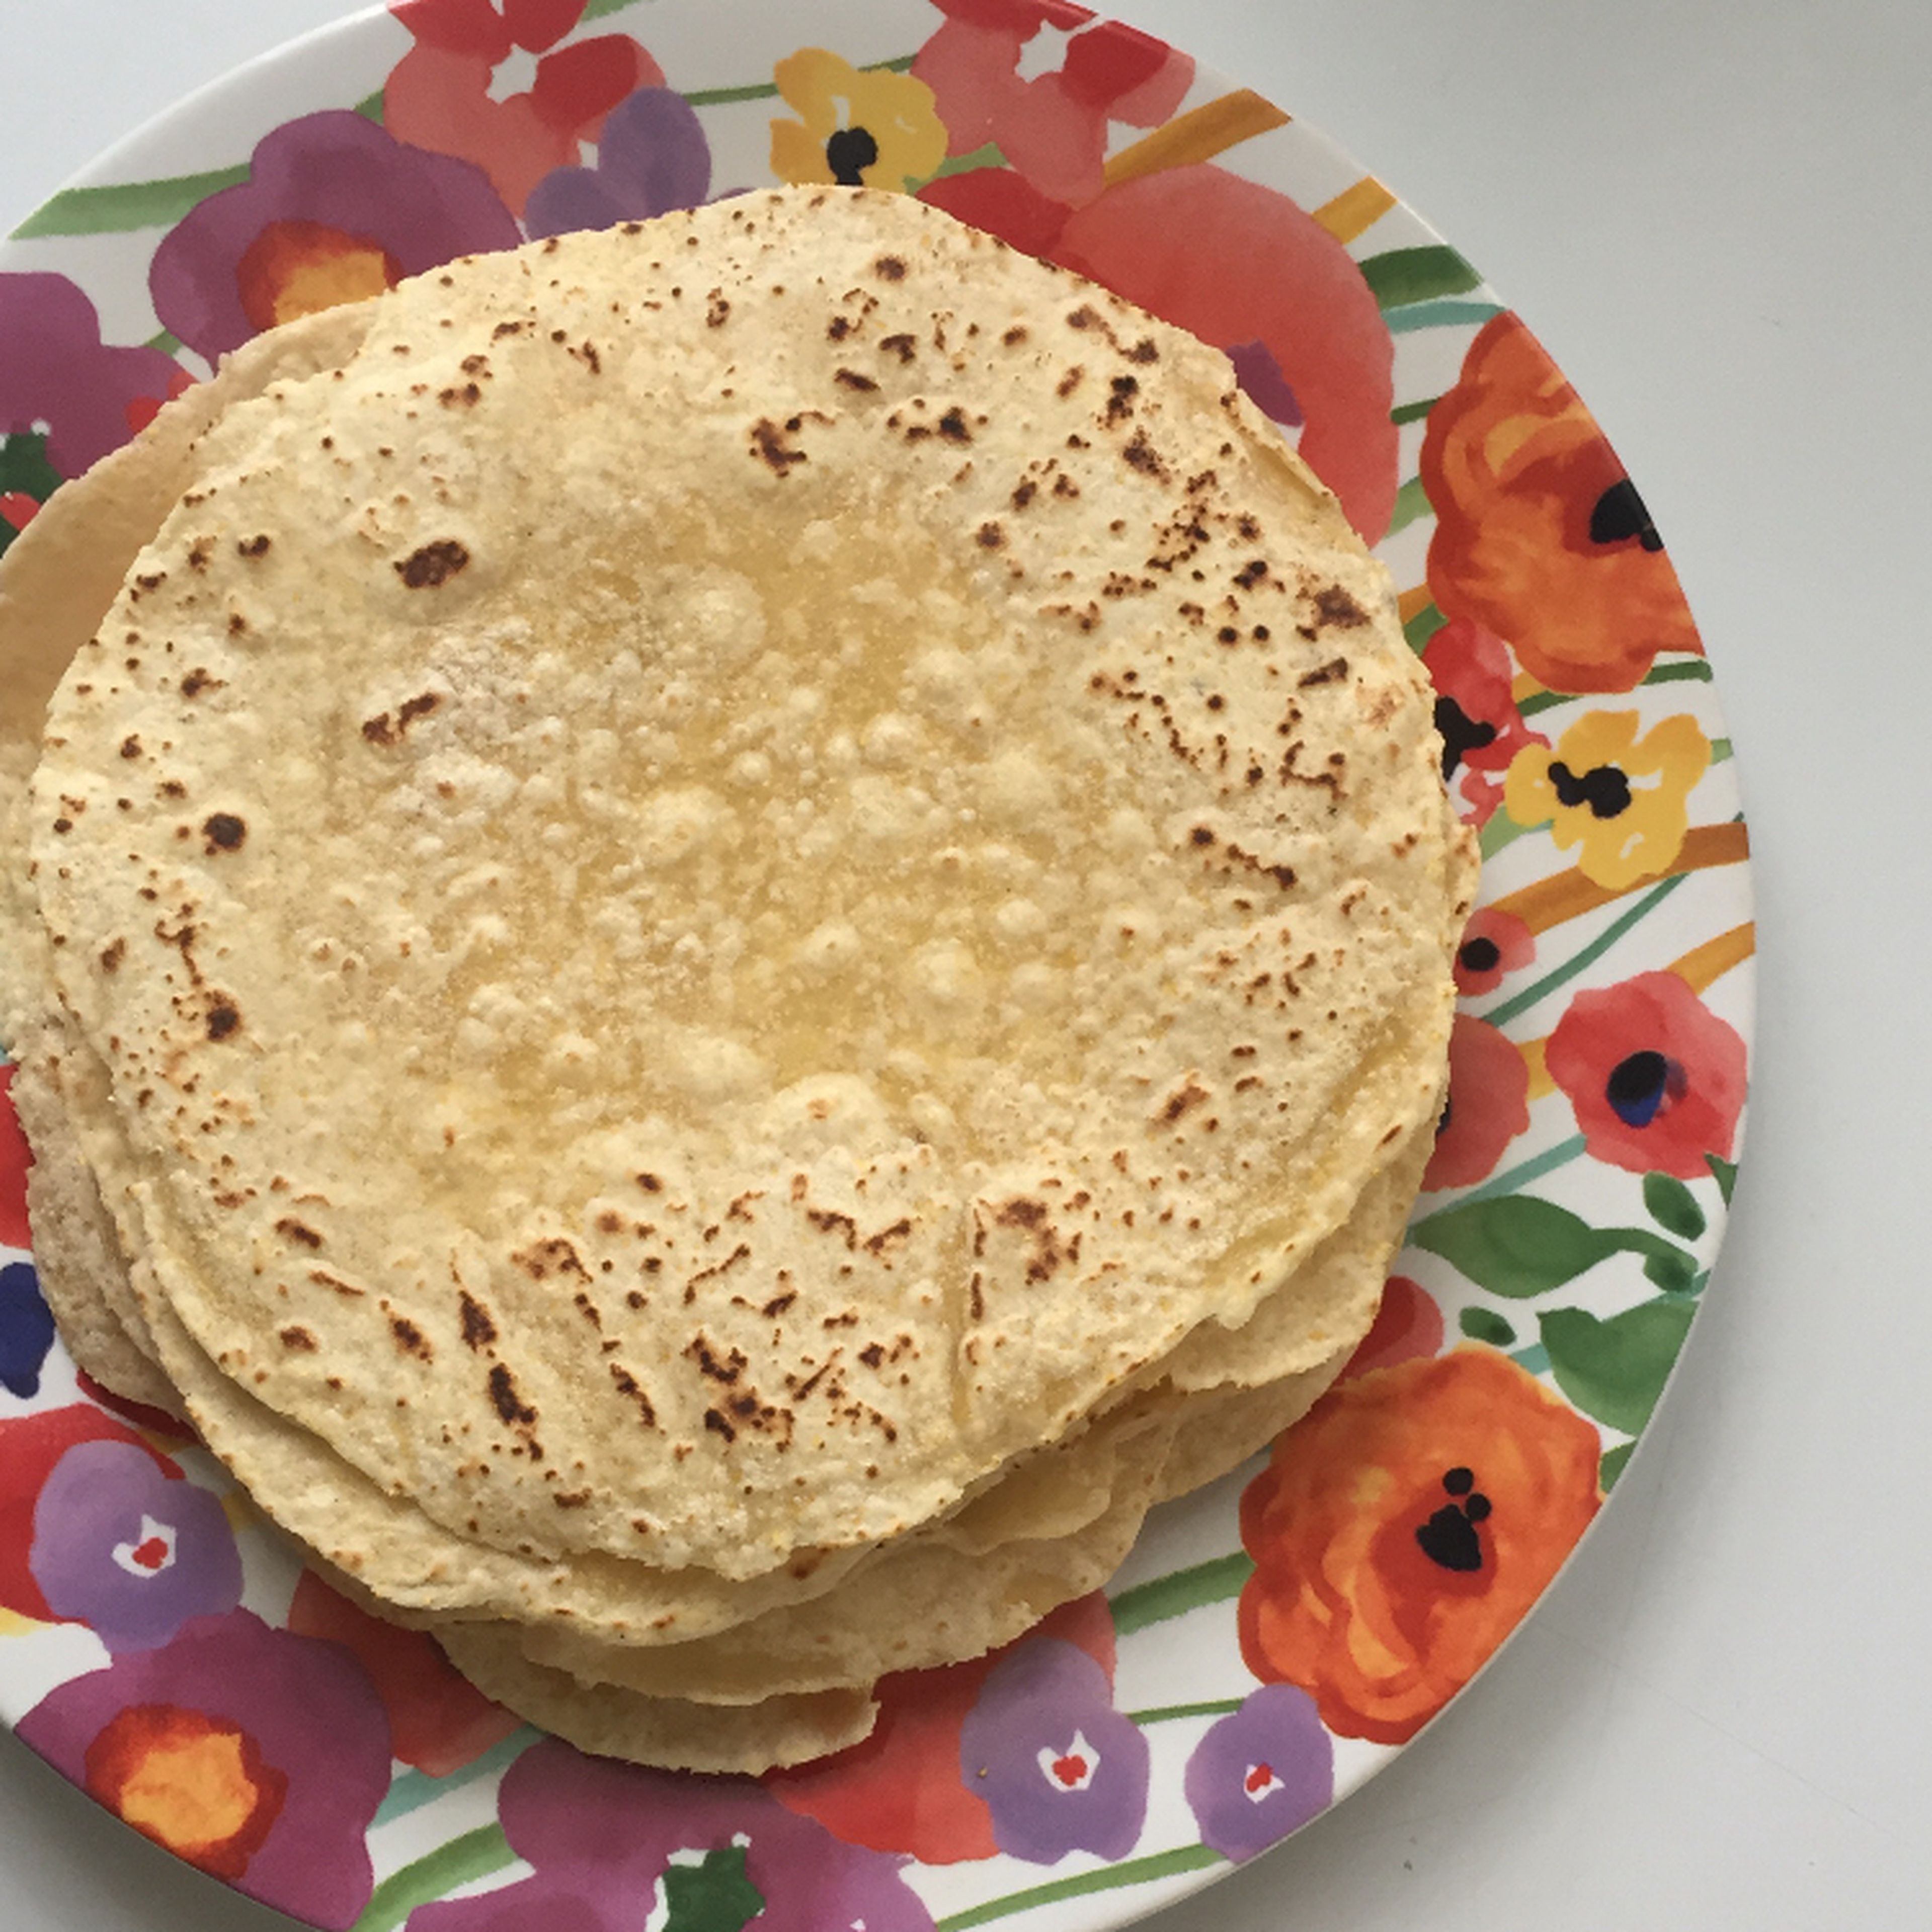 repeat step six with all the tortillas. Let cool for a few minutes then place in a plastic bag or tupper while still warm. This will keep the humidity in your tortillas until serving time. Serve and enjoy!